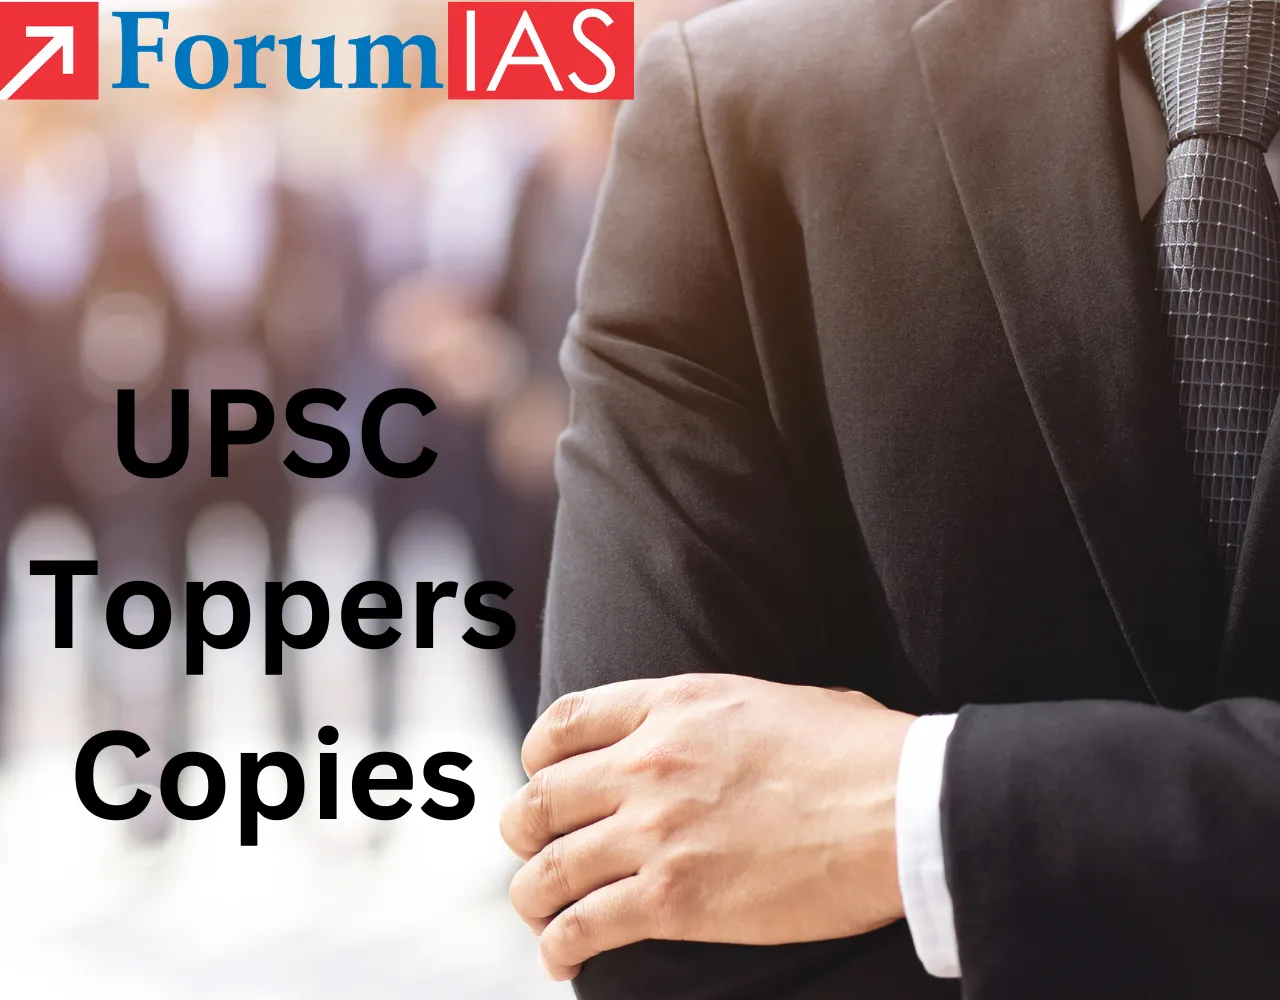 UPSC Toppers Copies